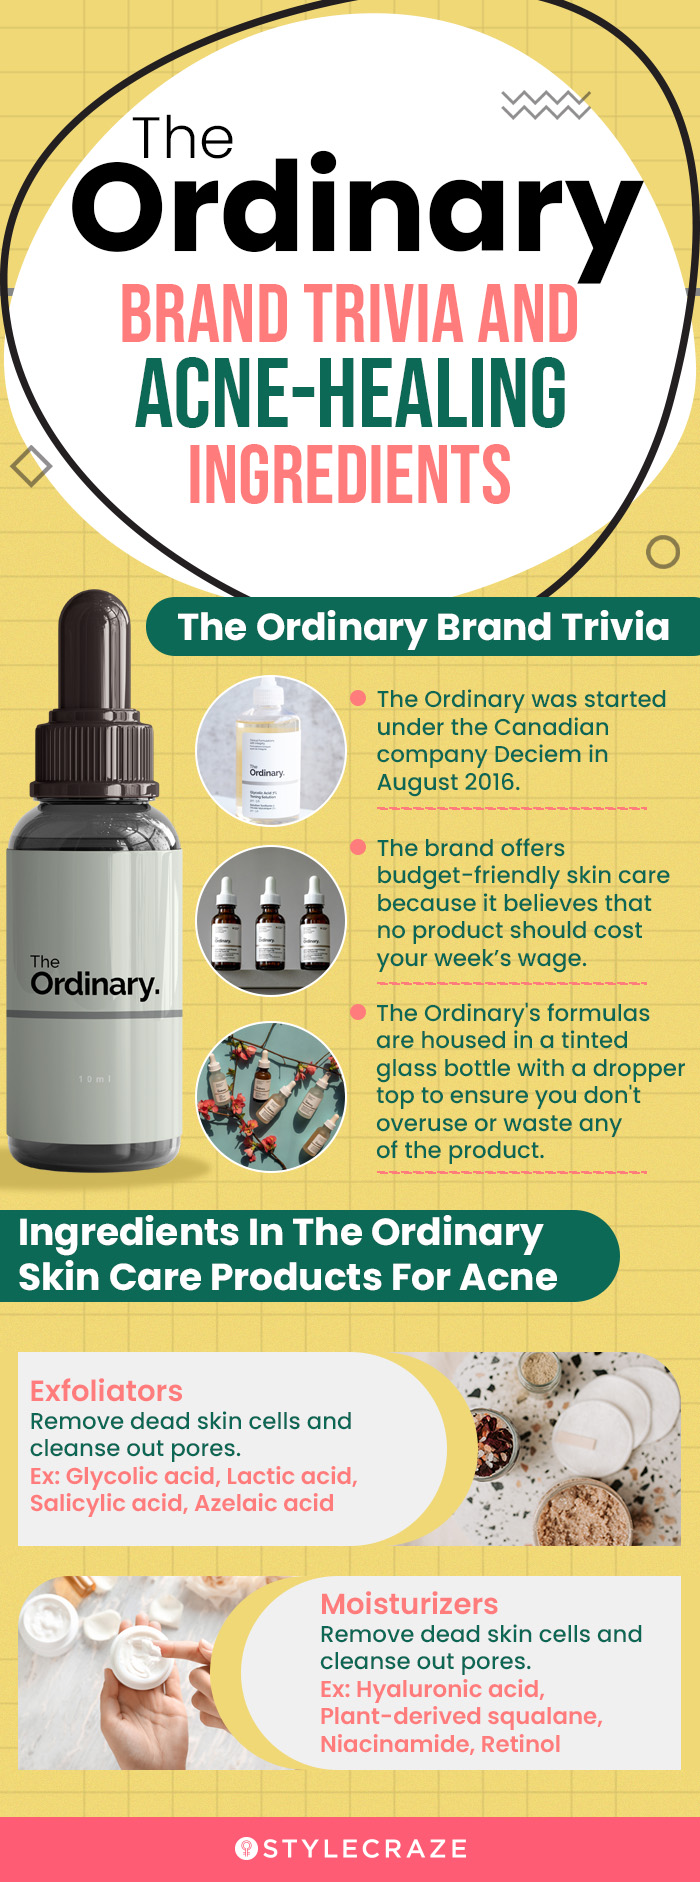 The Ordinary: Brand Trivia And Acne-Healing Ingredients [infographic]